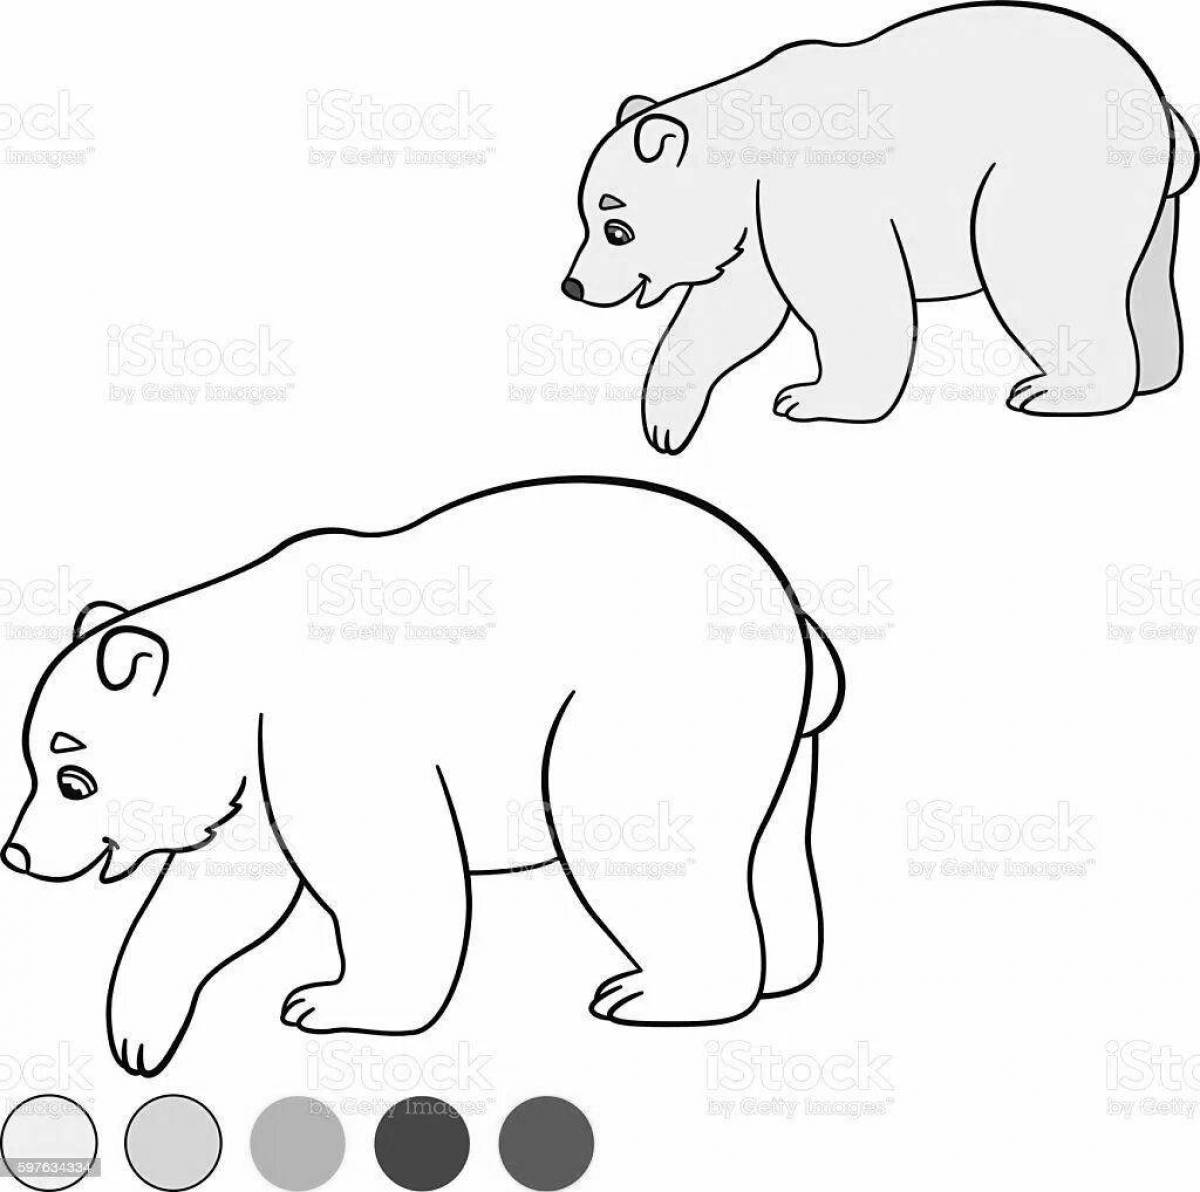 Living coloring of a polar bear for children 3-4 years old